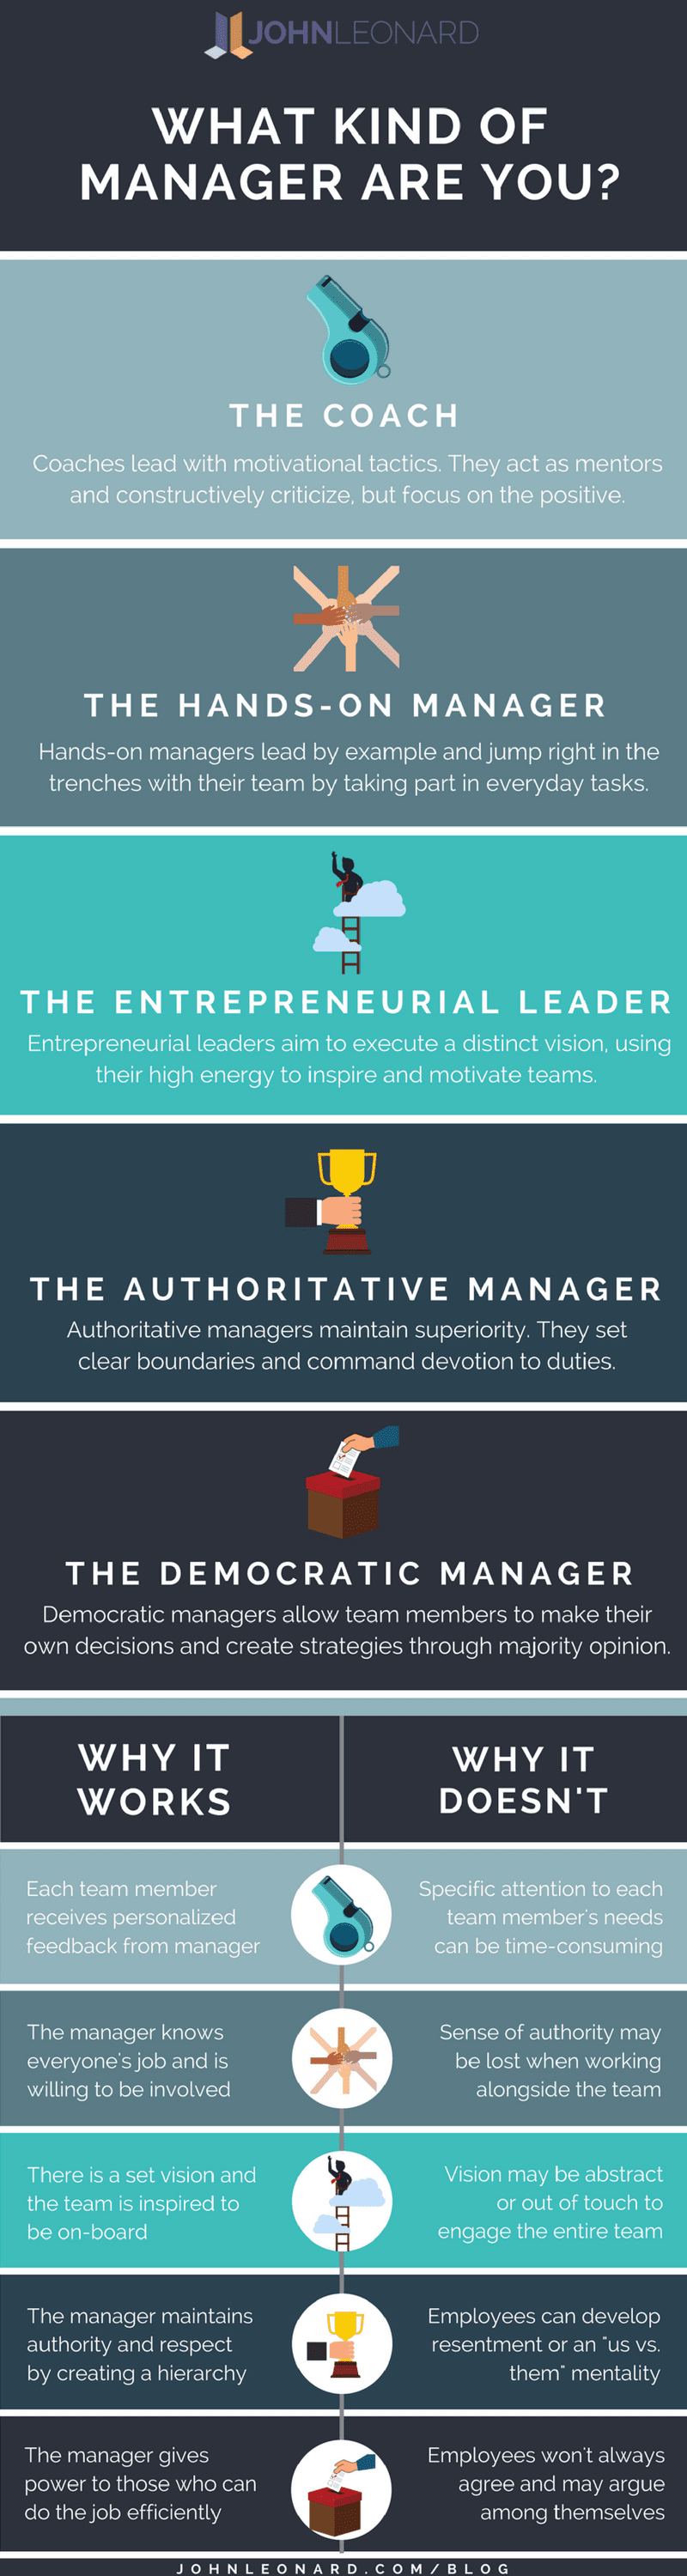 What Kind of Manager Are You (Full Infographic).png